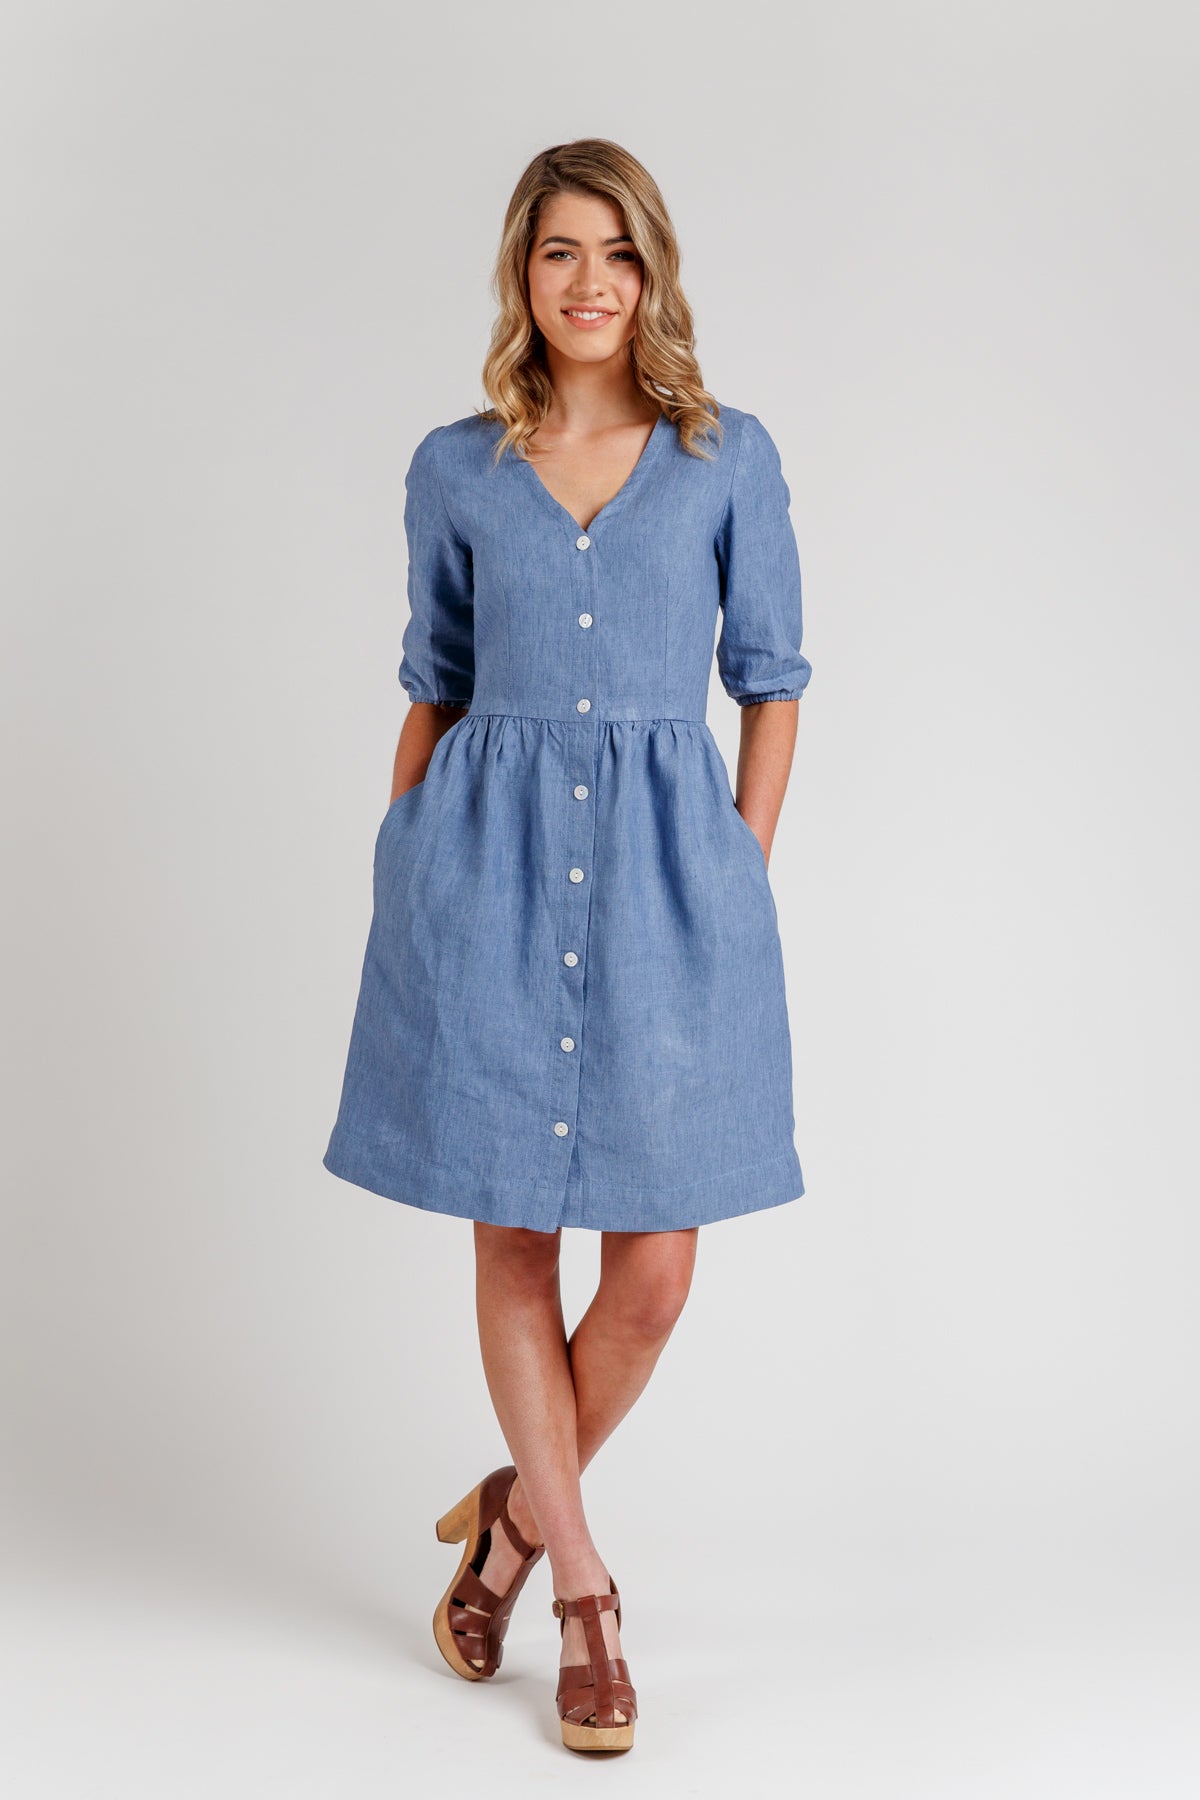 Darling Ranges Dress and Blouse